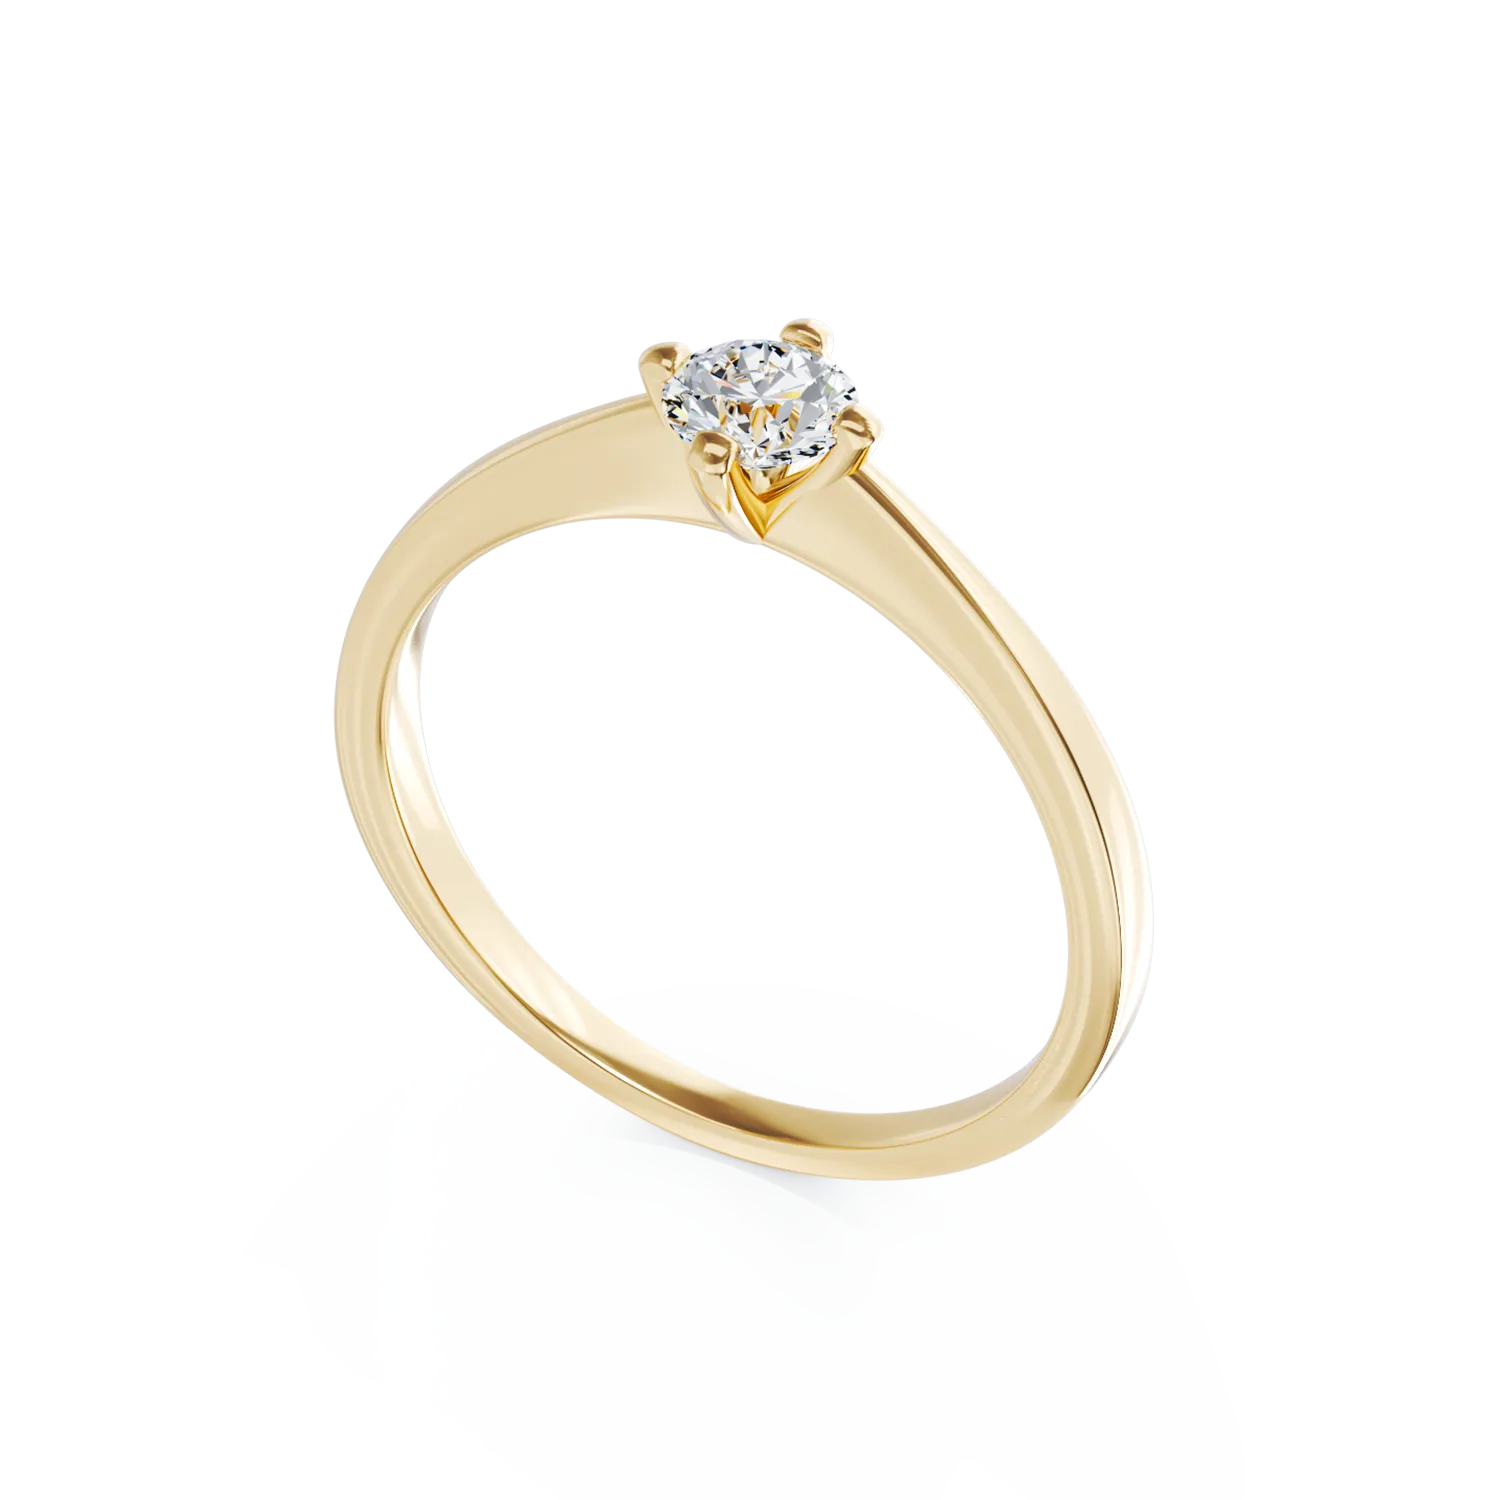 18K yellow gold engagement ring with 0.3ct solitaire diamond